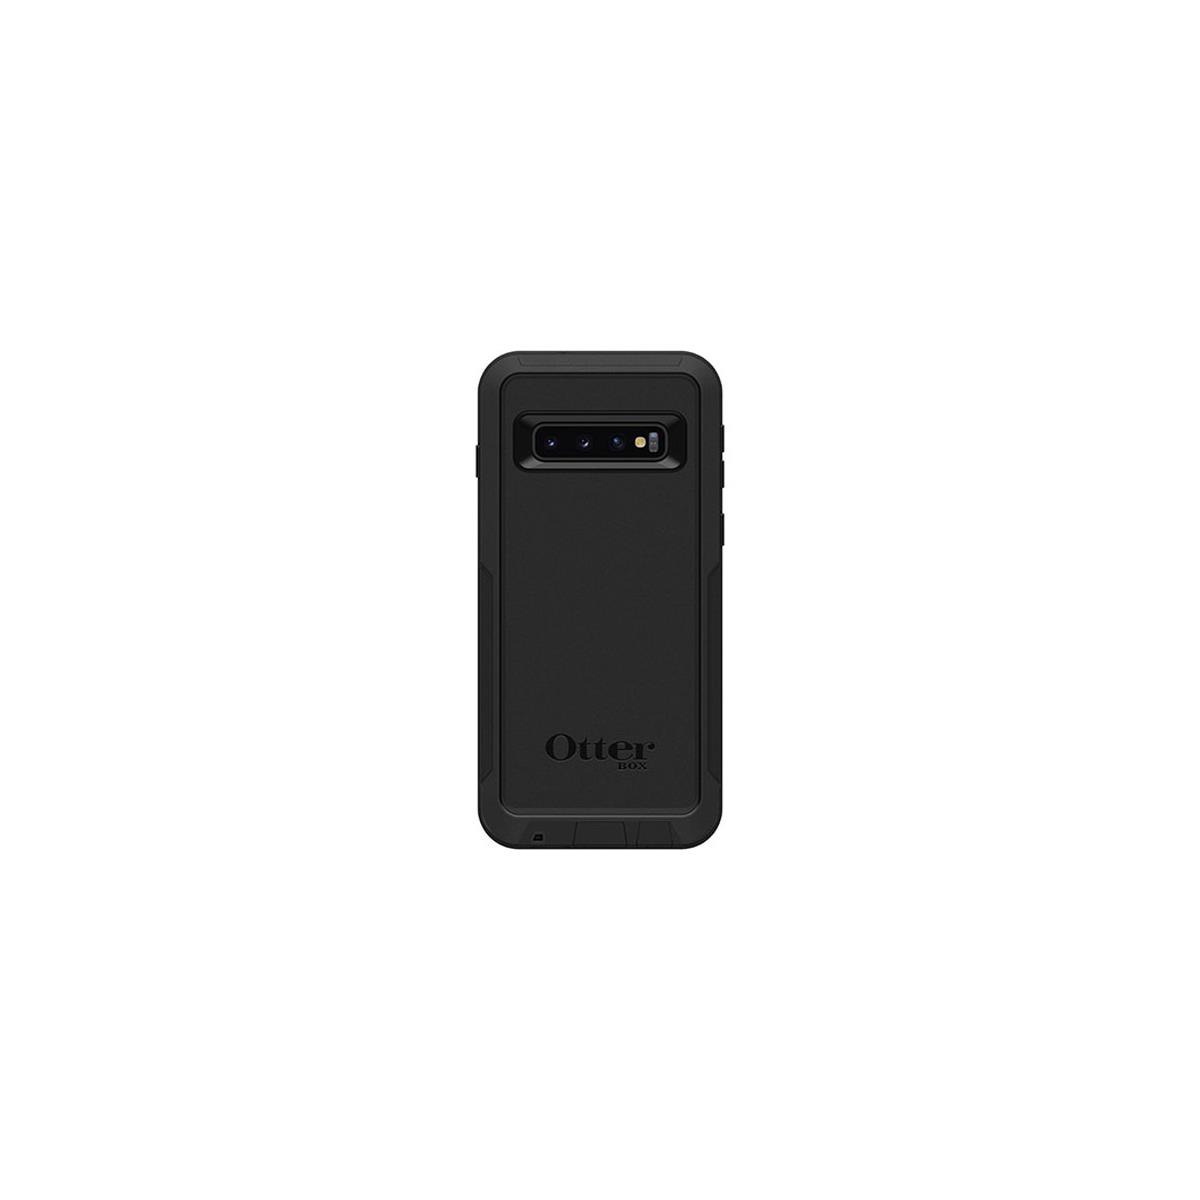 Image of OtterBox Pursuit Series Case for Samsung Galaxy S10 Smartphone